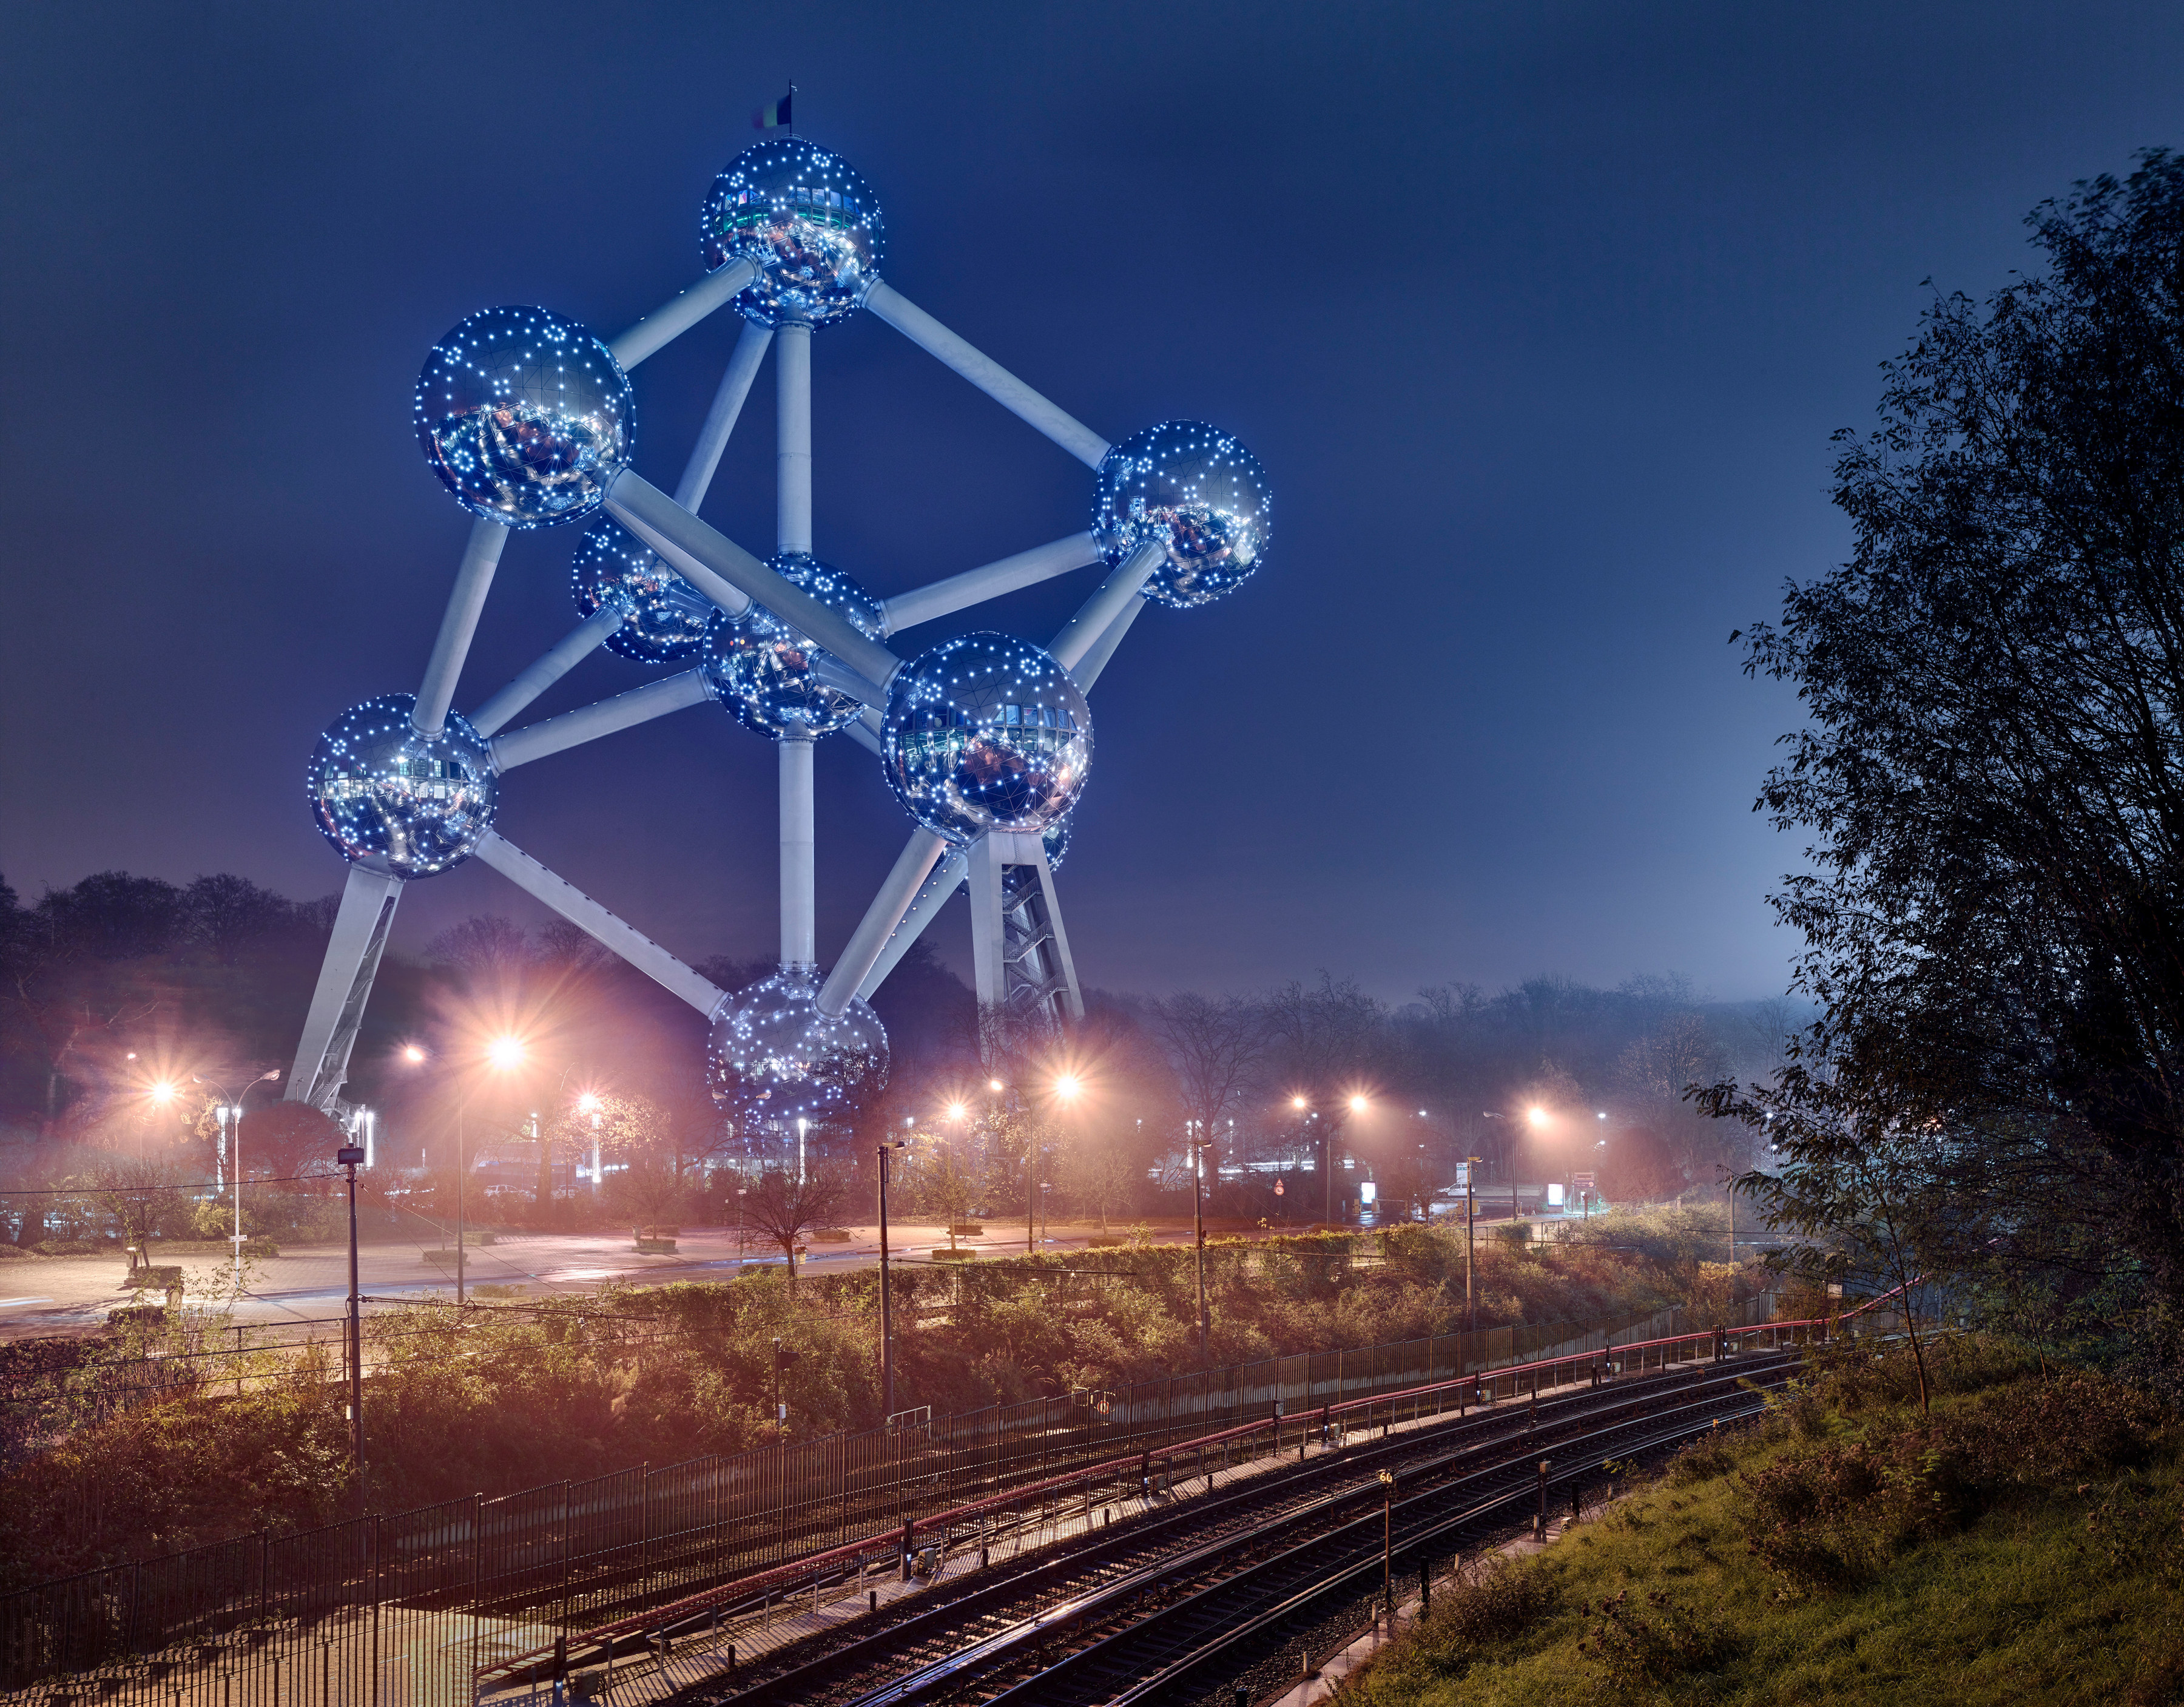 Large sculpture of an atom in Brussels, overlooking traintracks